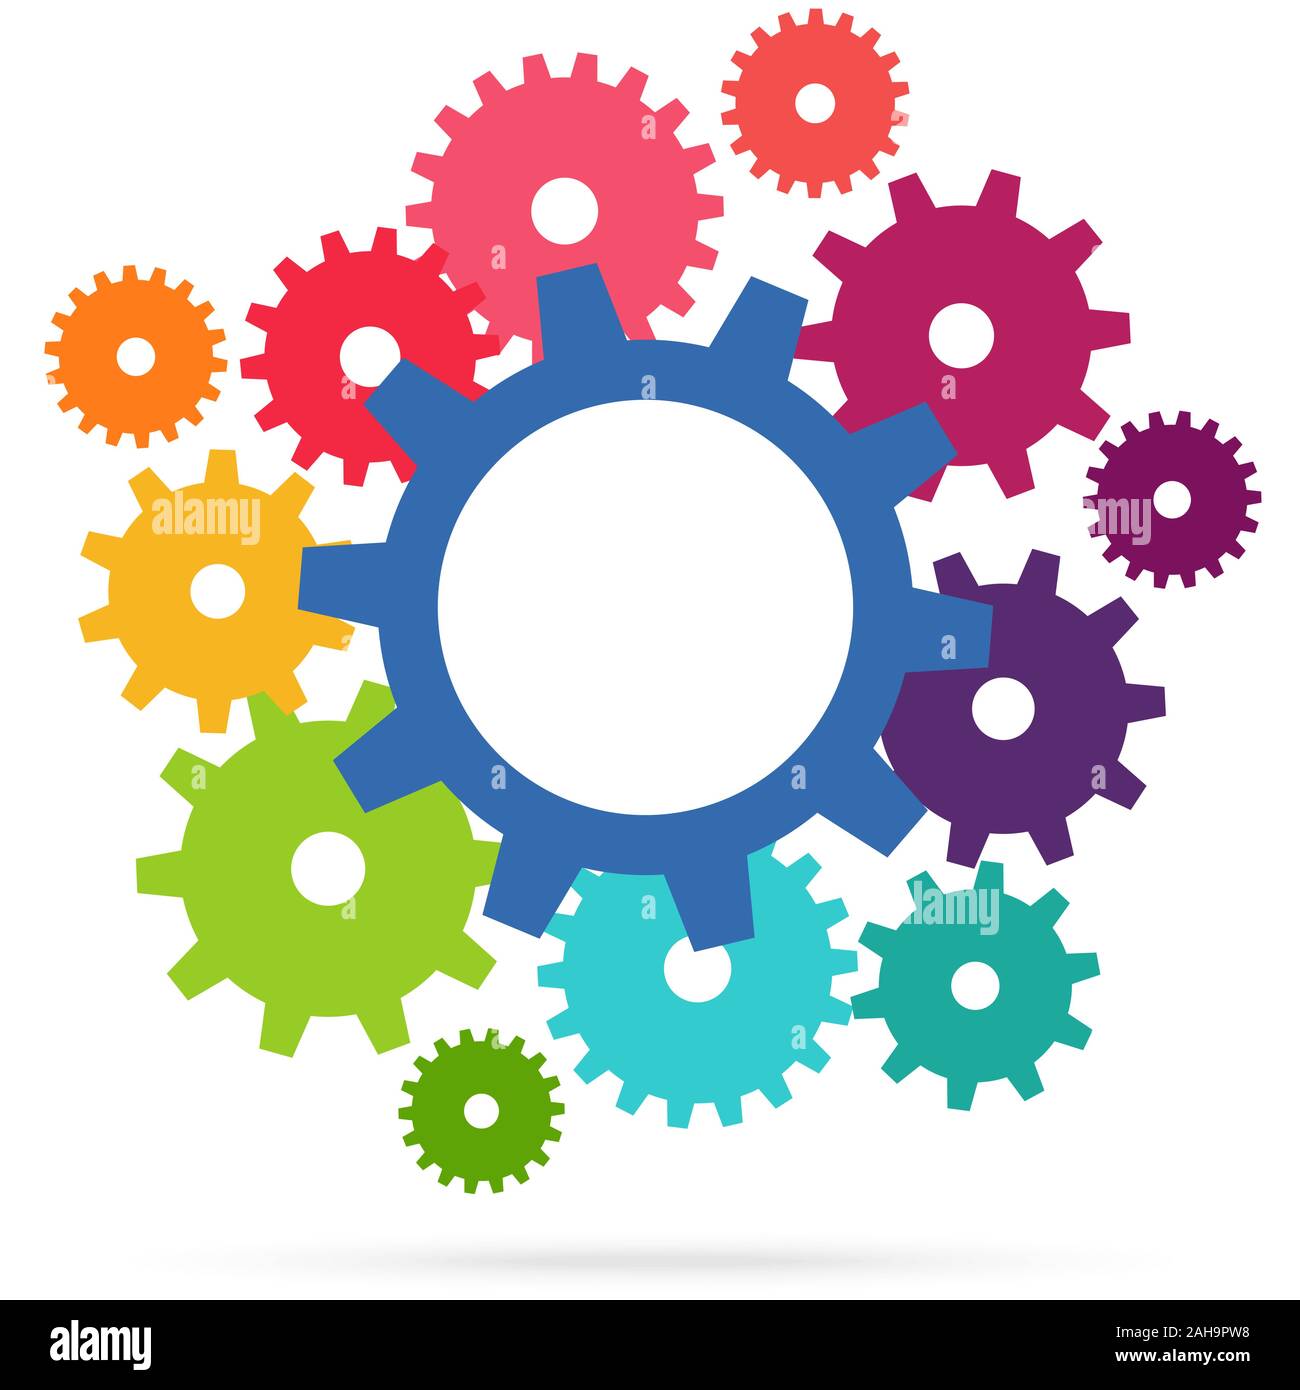 illustration of colored gears symbolizing cooperation or teamwork process Stock Vector